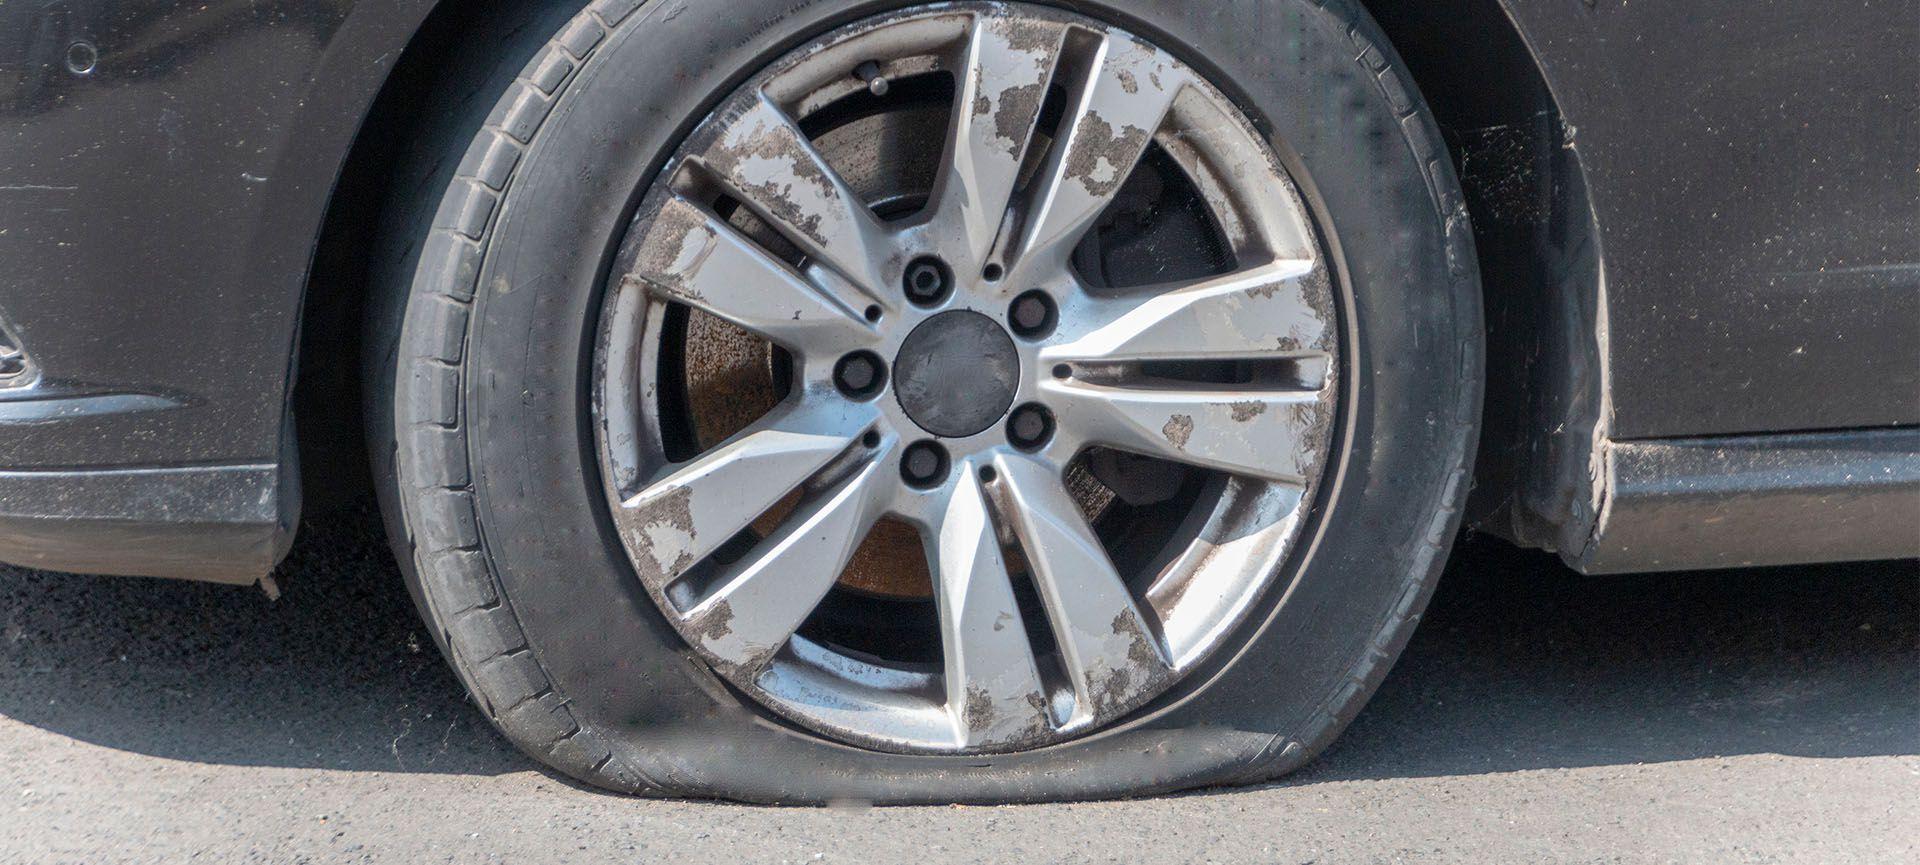 Can a Bent Tire Rim Be Repaired?